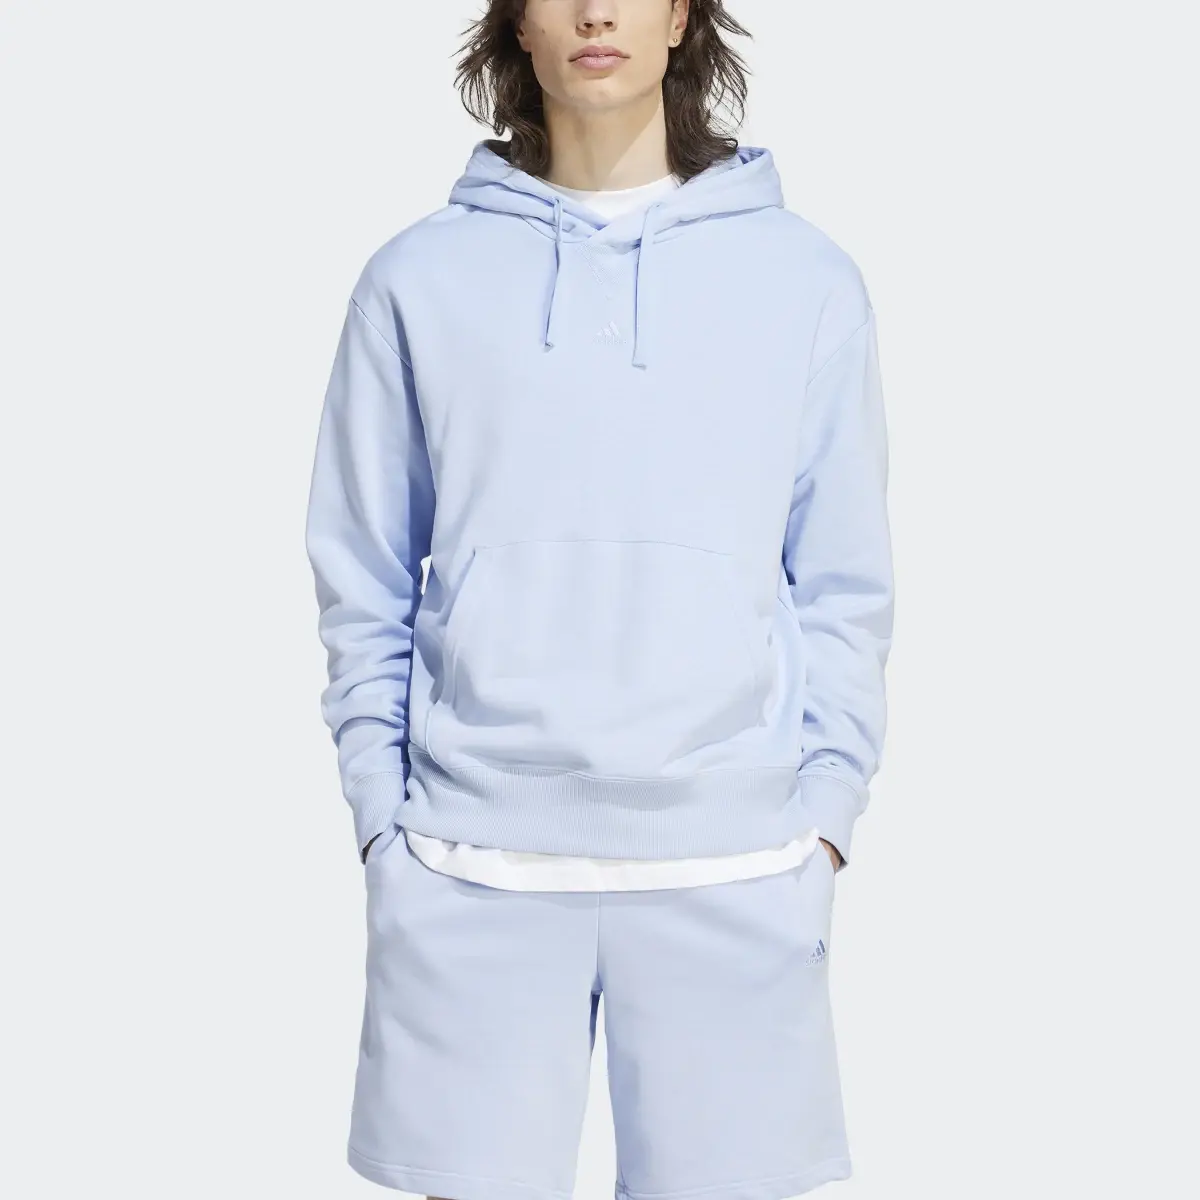 Adidas ALL SZN French Terry Hoodie. 1